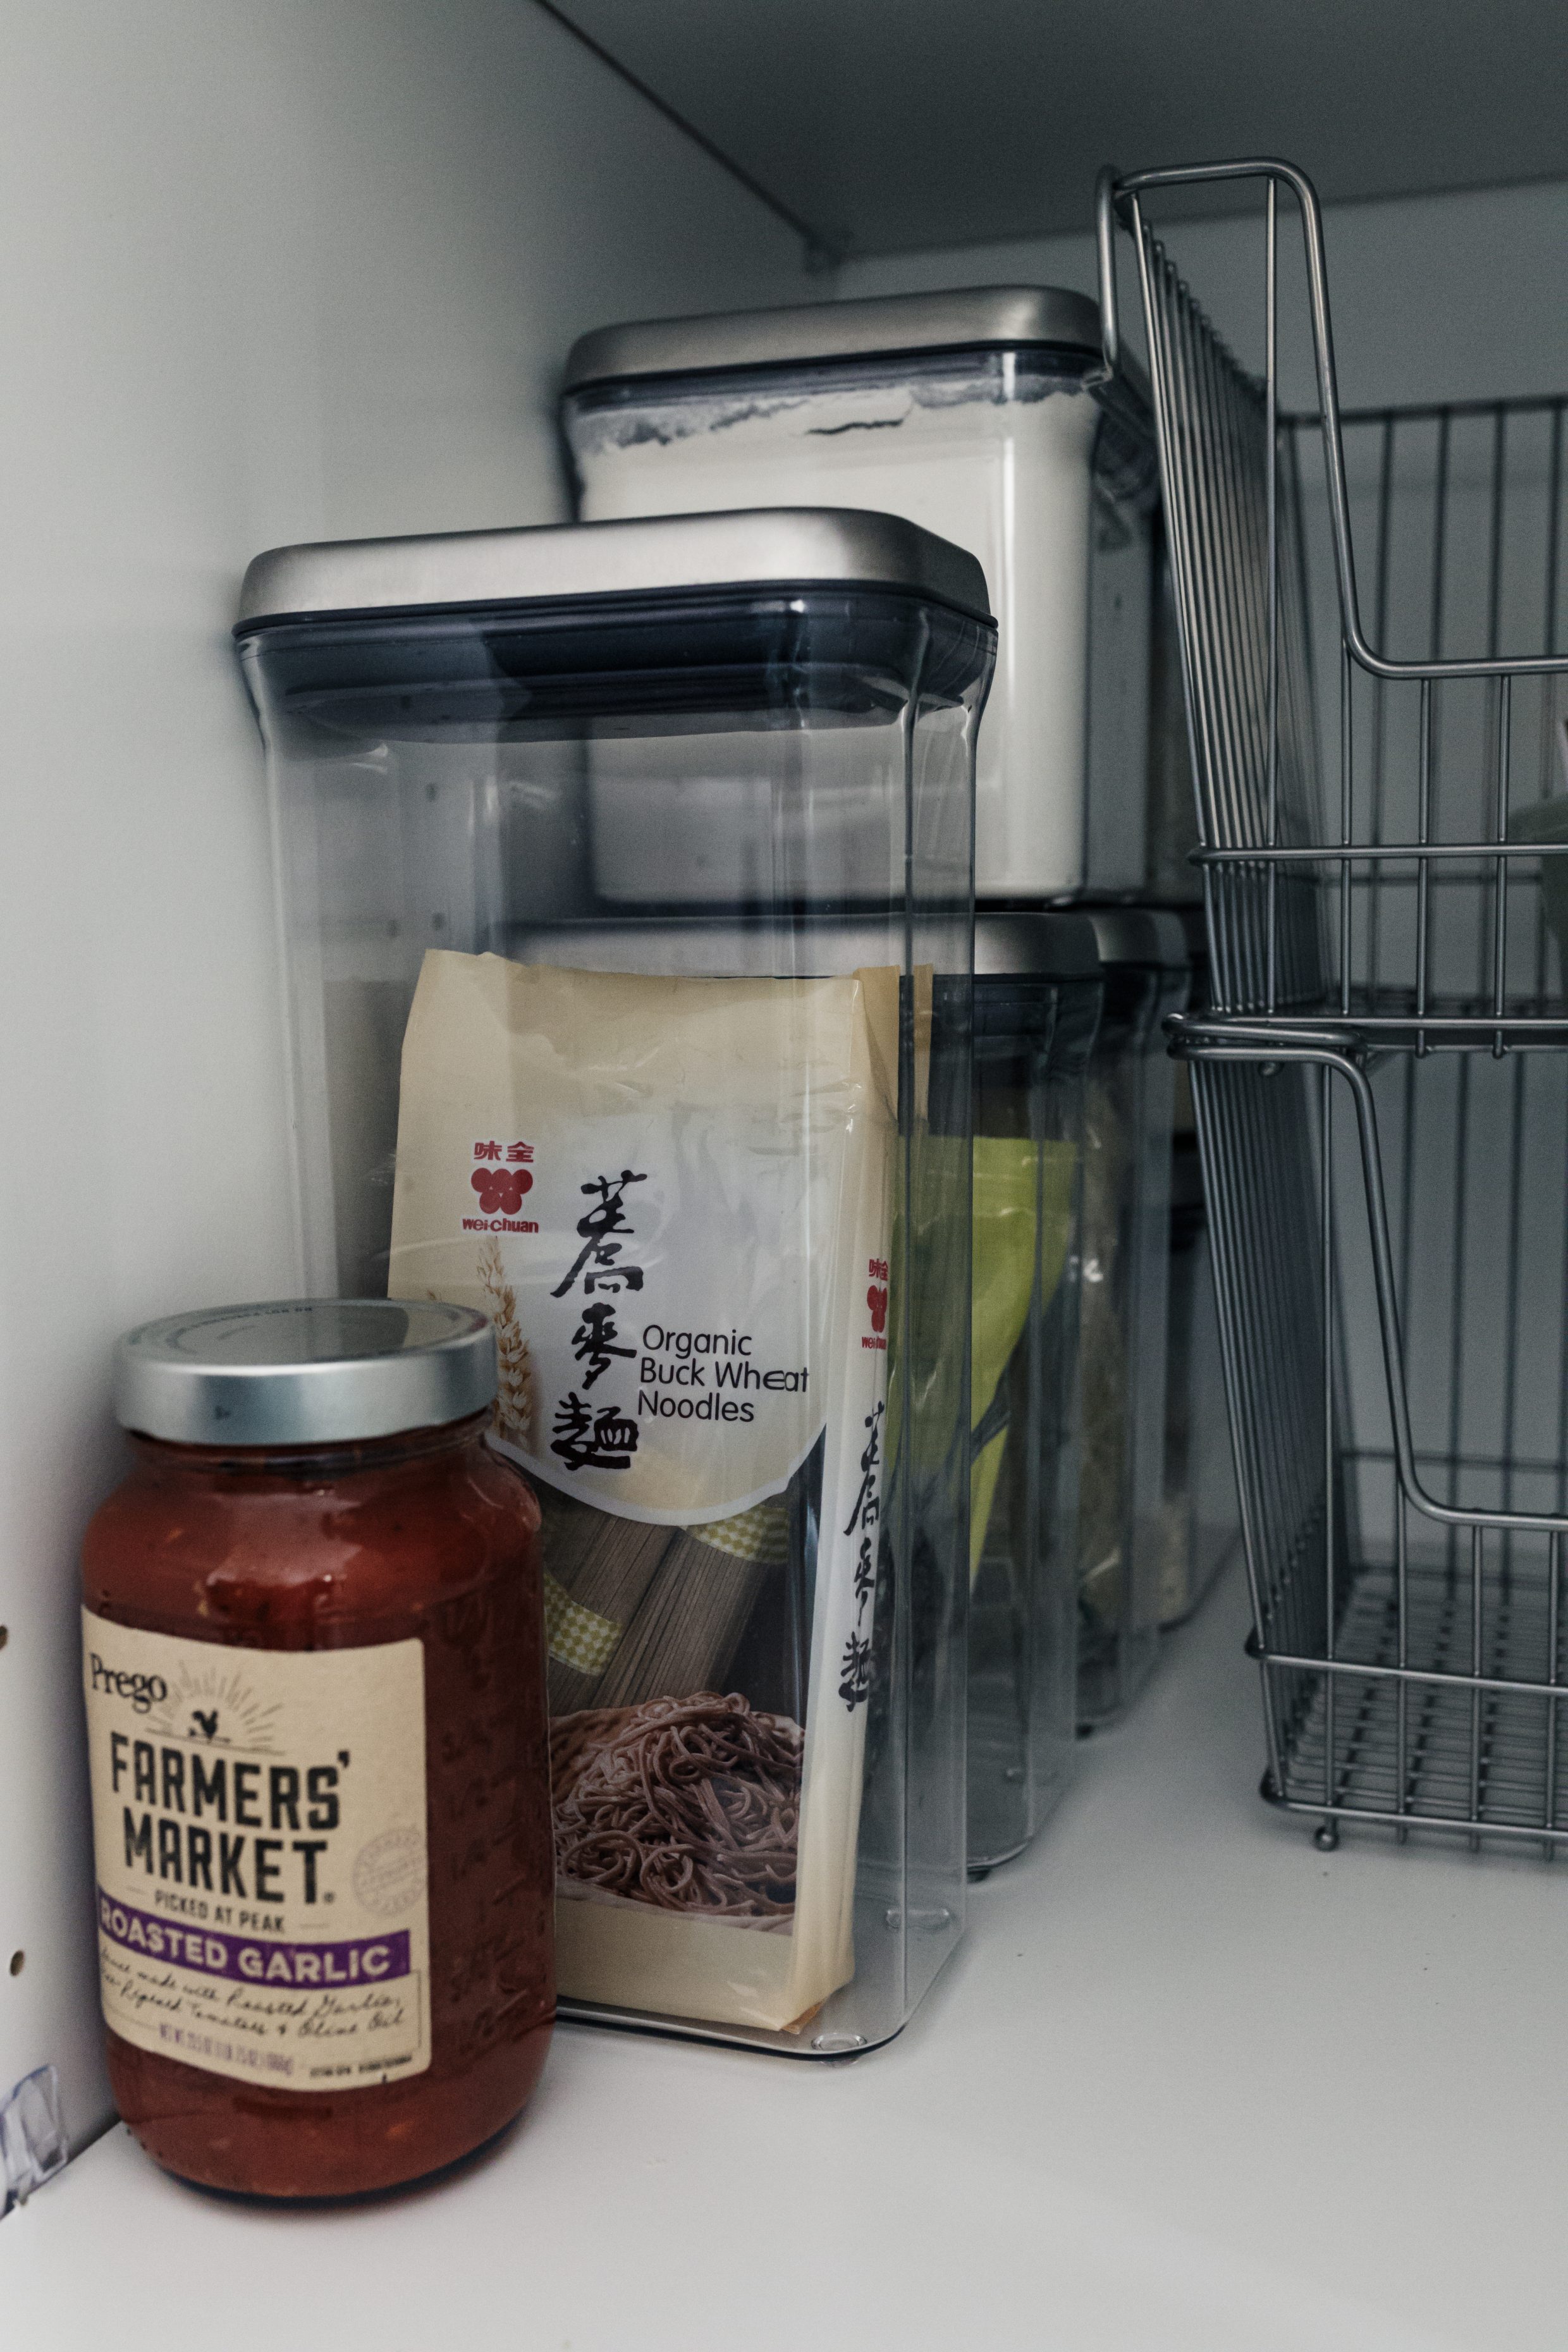 Blogger Hoang-Kim shares her four products for kitchen organization